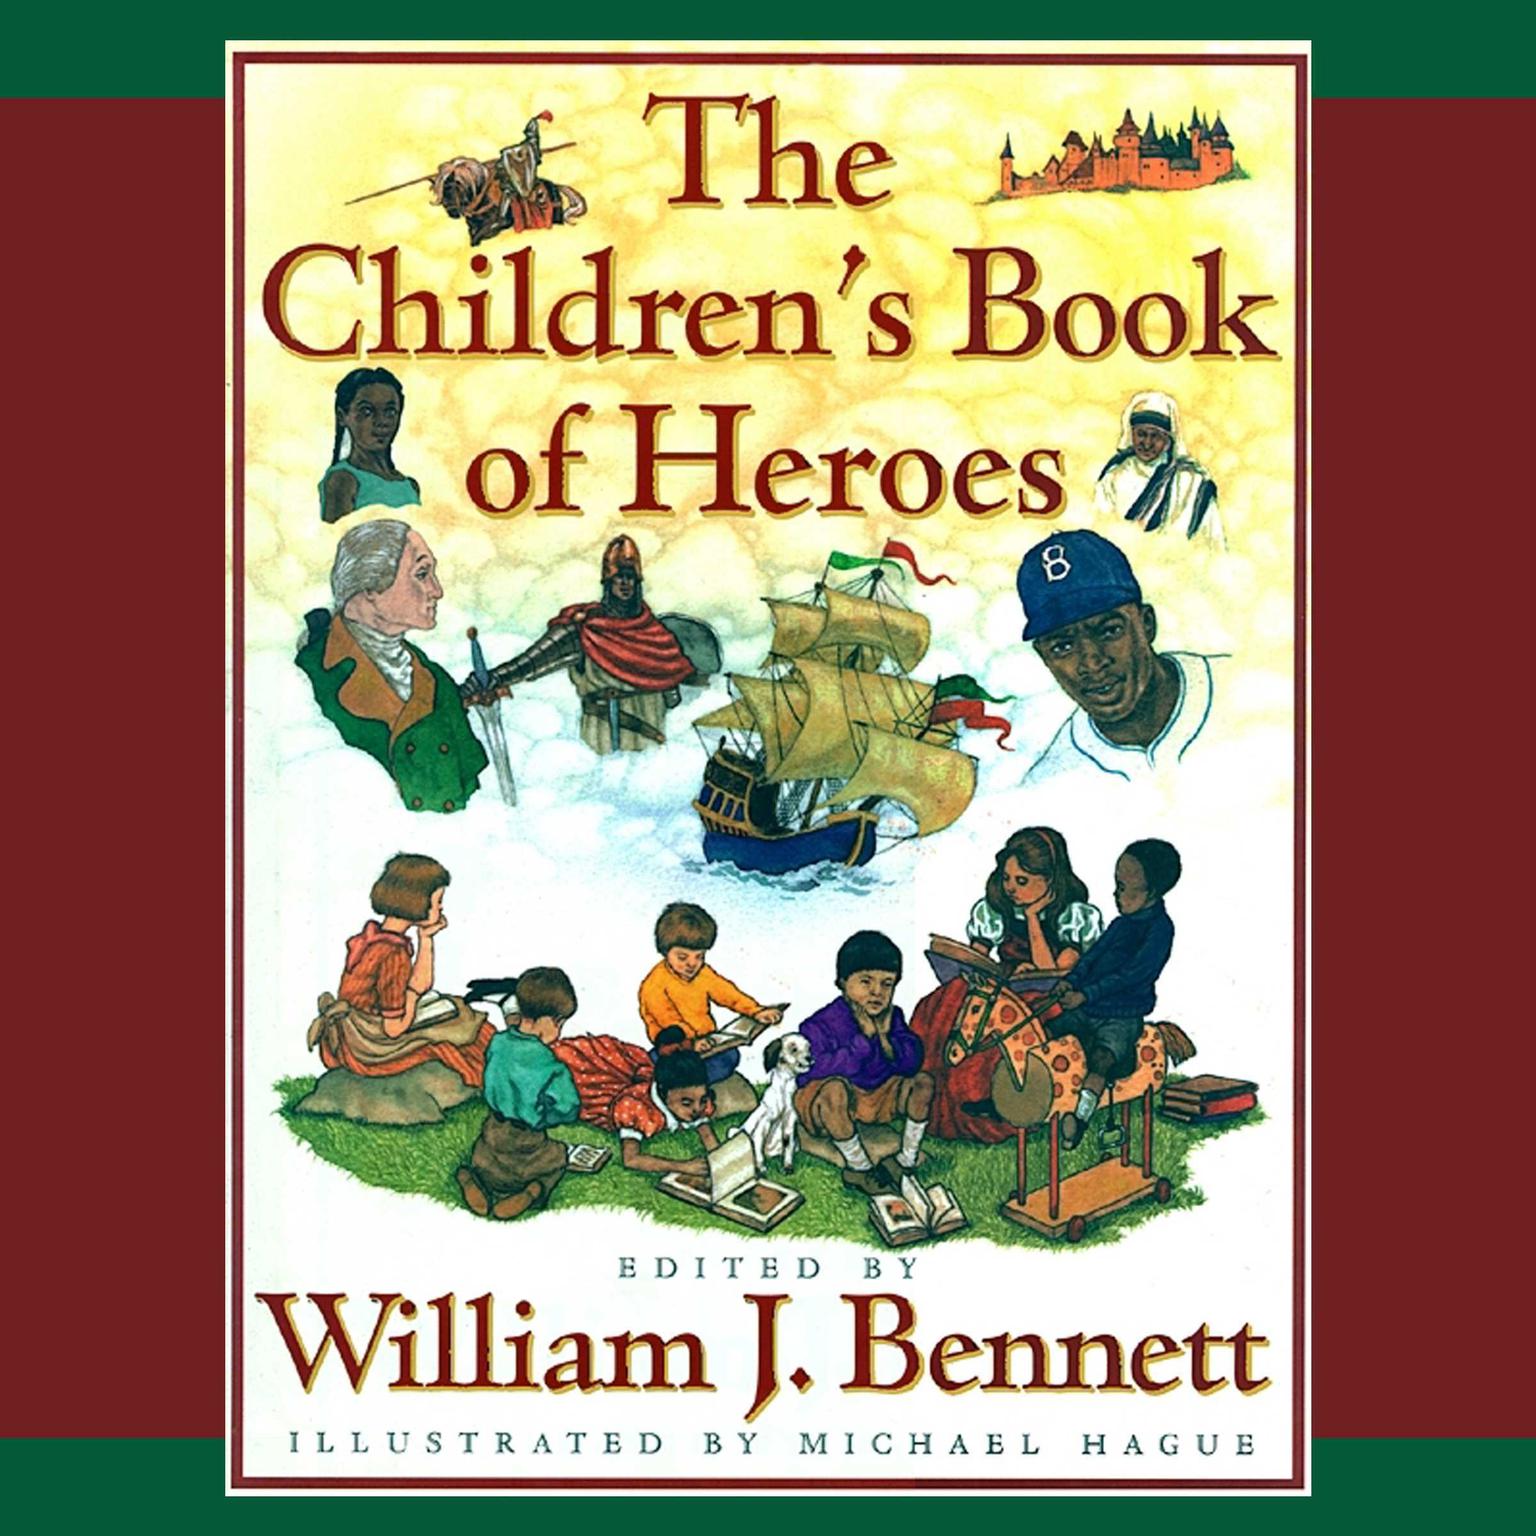 The Children’s Book of Heroes (Abridged) Audiobook, by William J. Bennett